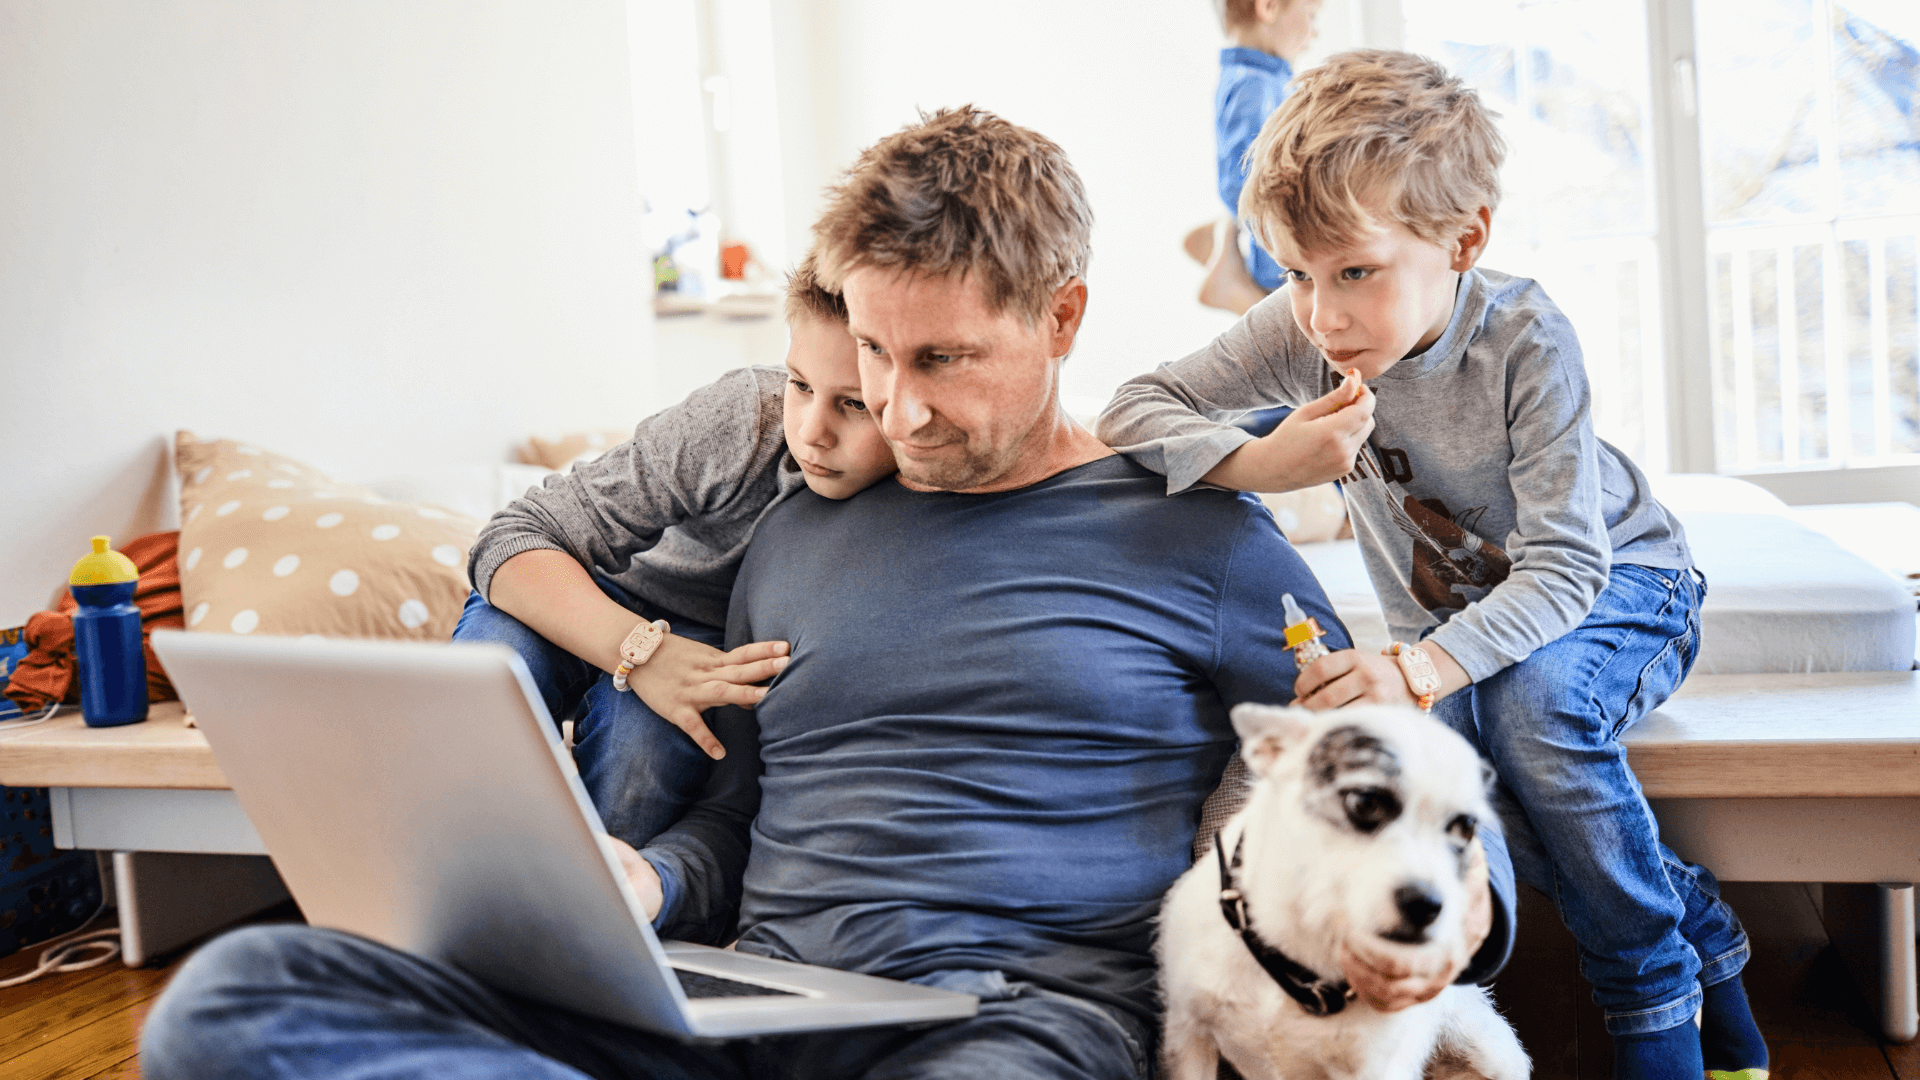 Father sits on floor with laptop on his legs. Two children lean on his shoulders to look at screen.